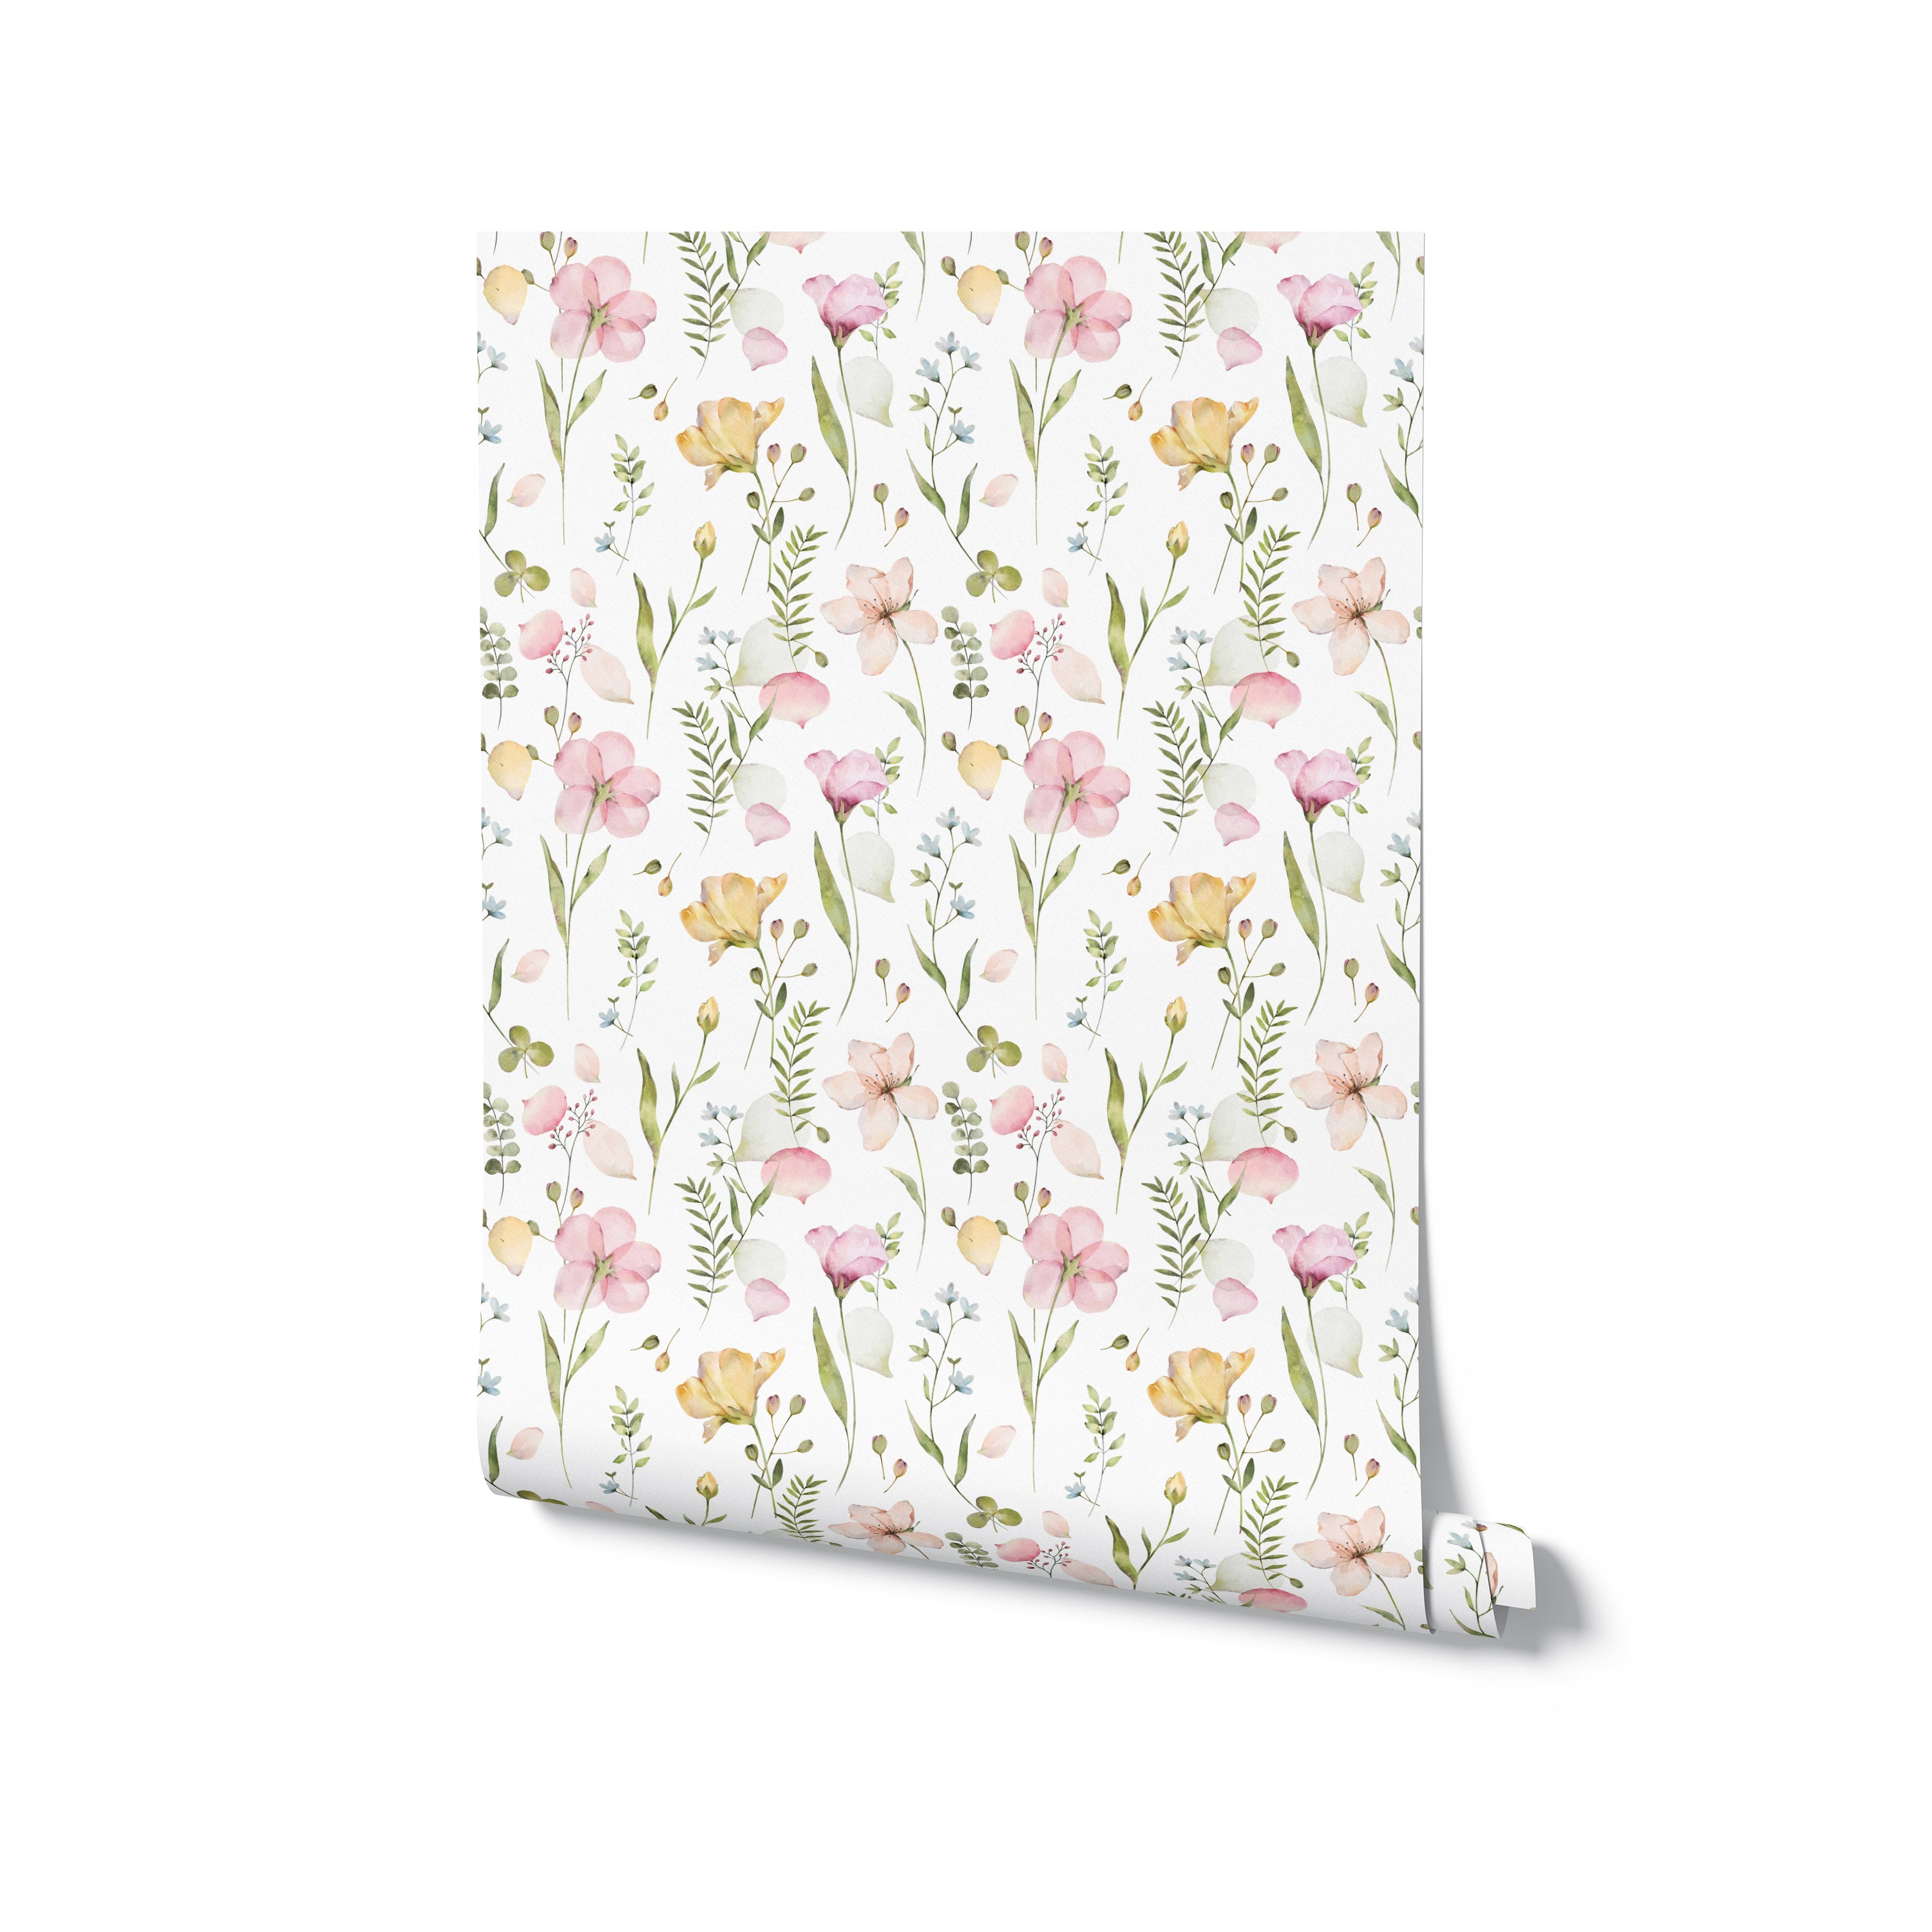 A roll of Serene Floral Wallpaper, displaying the full beauty of its floral pattern with soft pinks, muted yellows, and lush greens. This image showcases the wallpaper’s potential to transform any room into a soothing and aesthetically pleasing space.